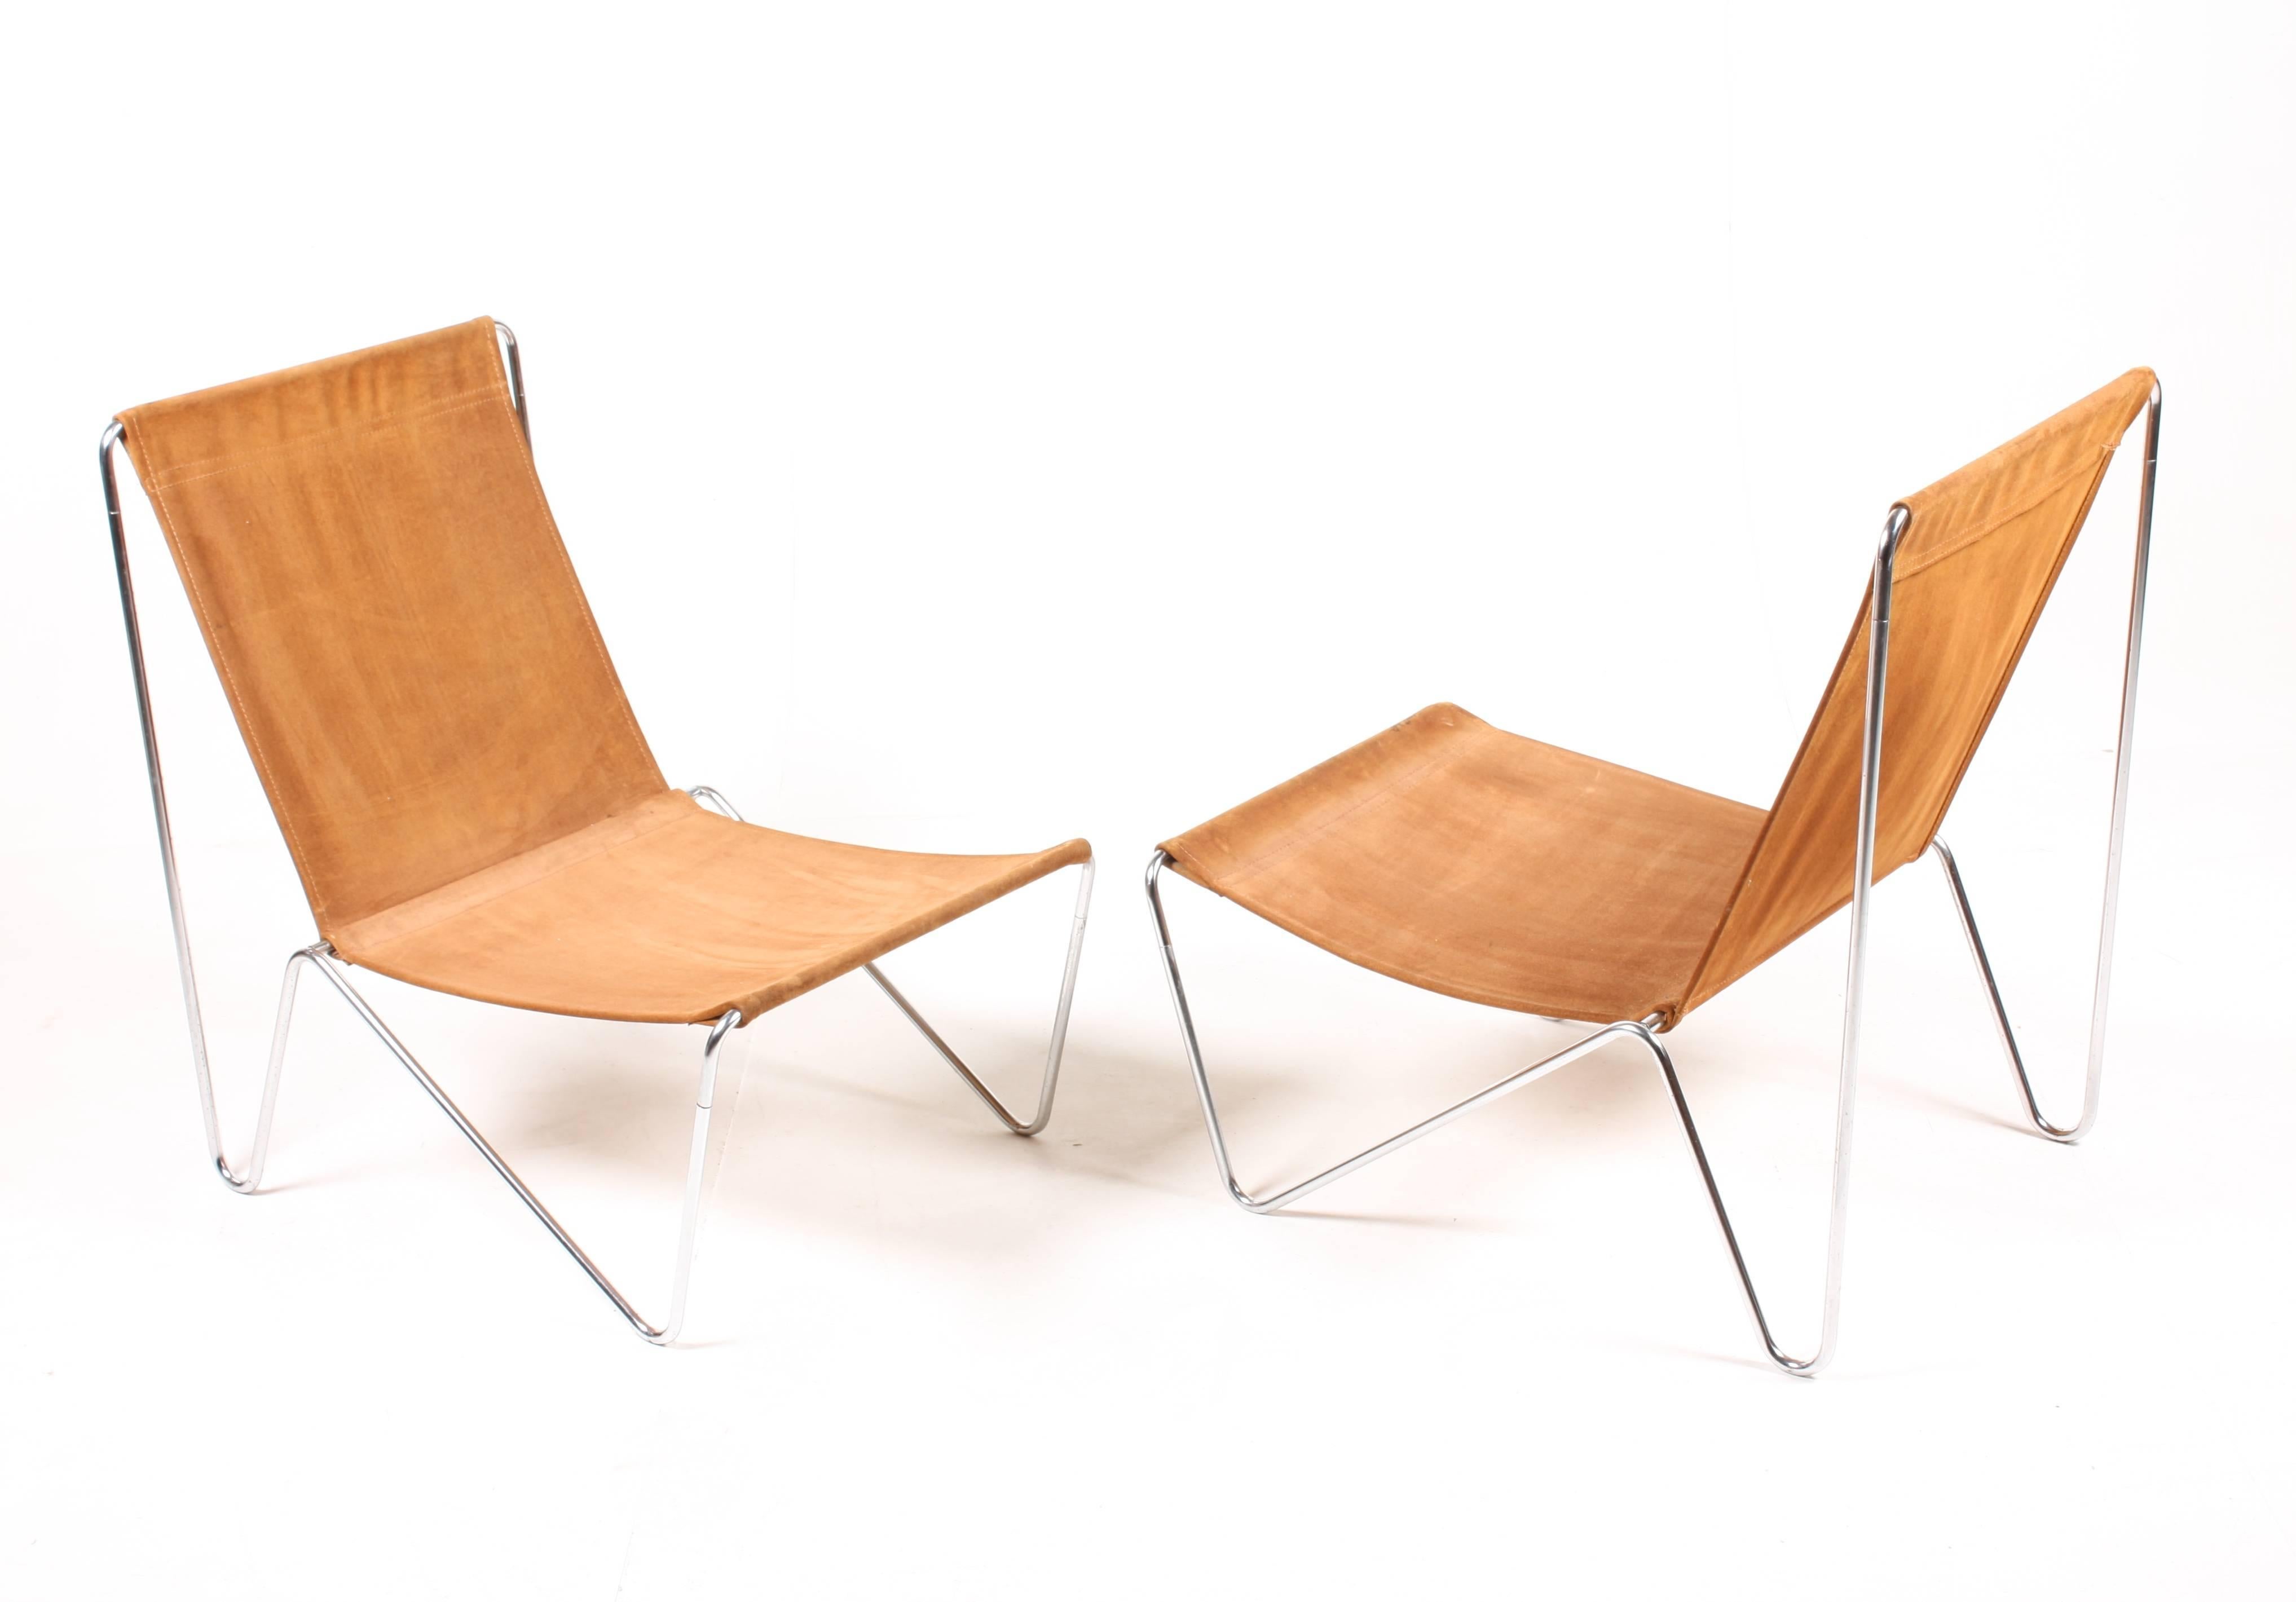 Pair of original bachelor chairs in suede designed by Maa. Verner Panton for Fritz Hansen in 1955. Verner Panton’s simple, iconic bachelor chair from 1955 is a light design, made to move around easily, inside or outside. Great original condition.